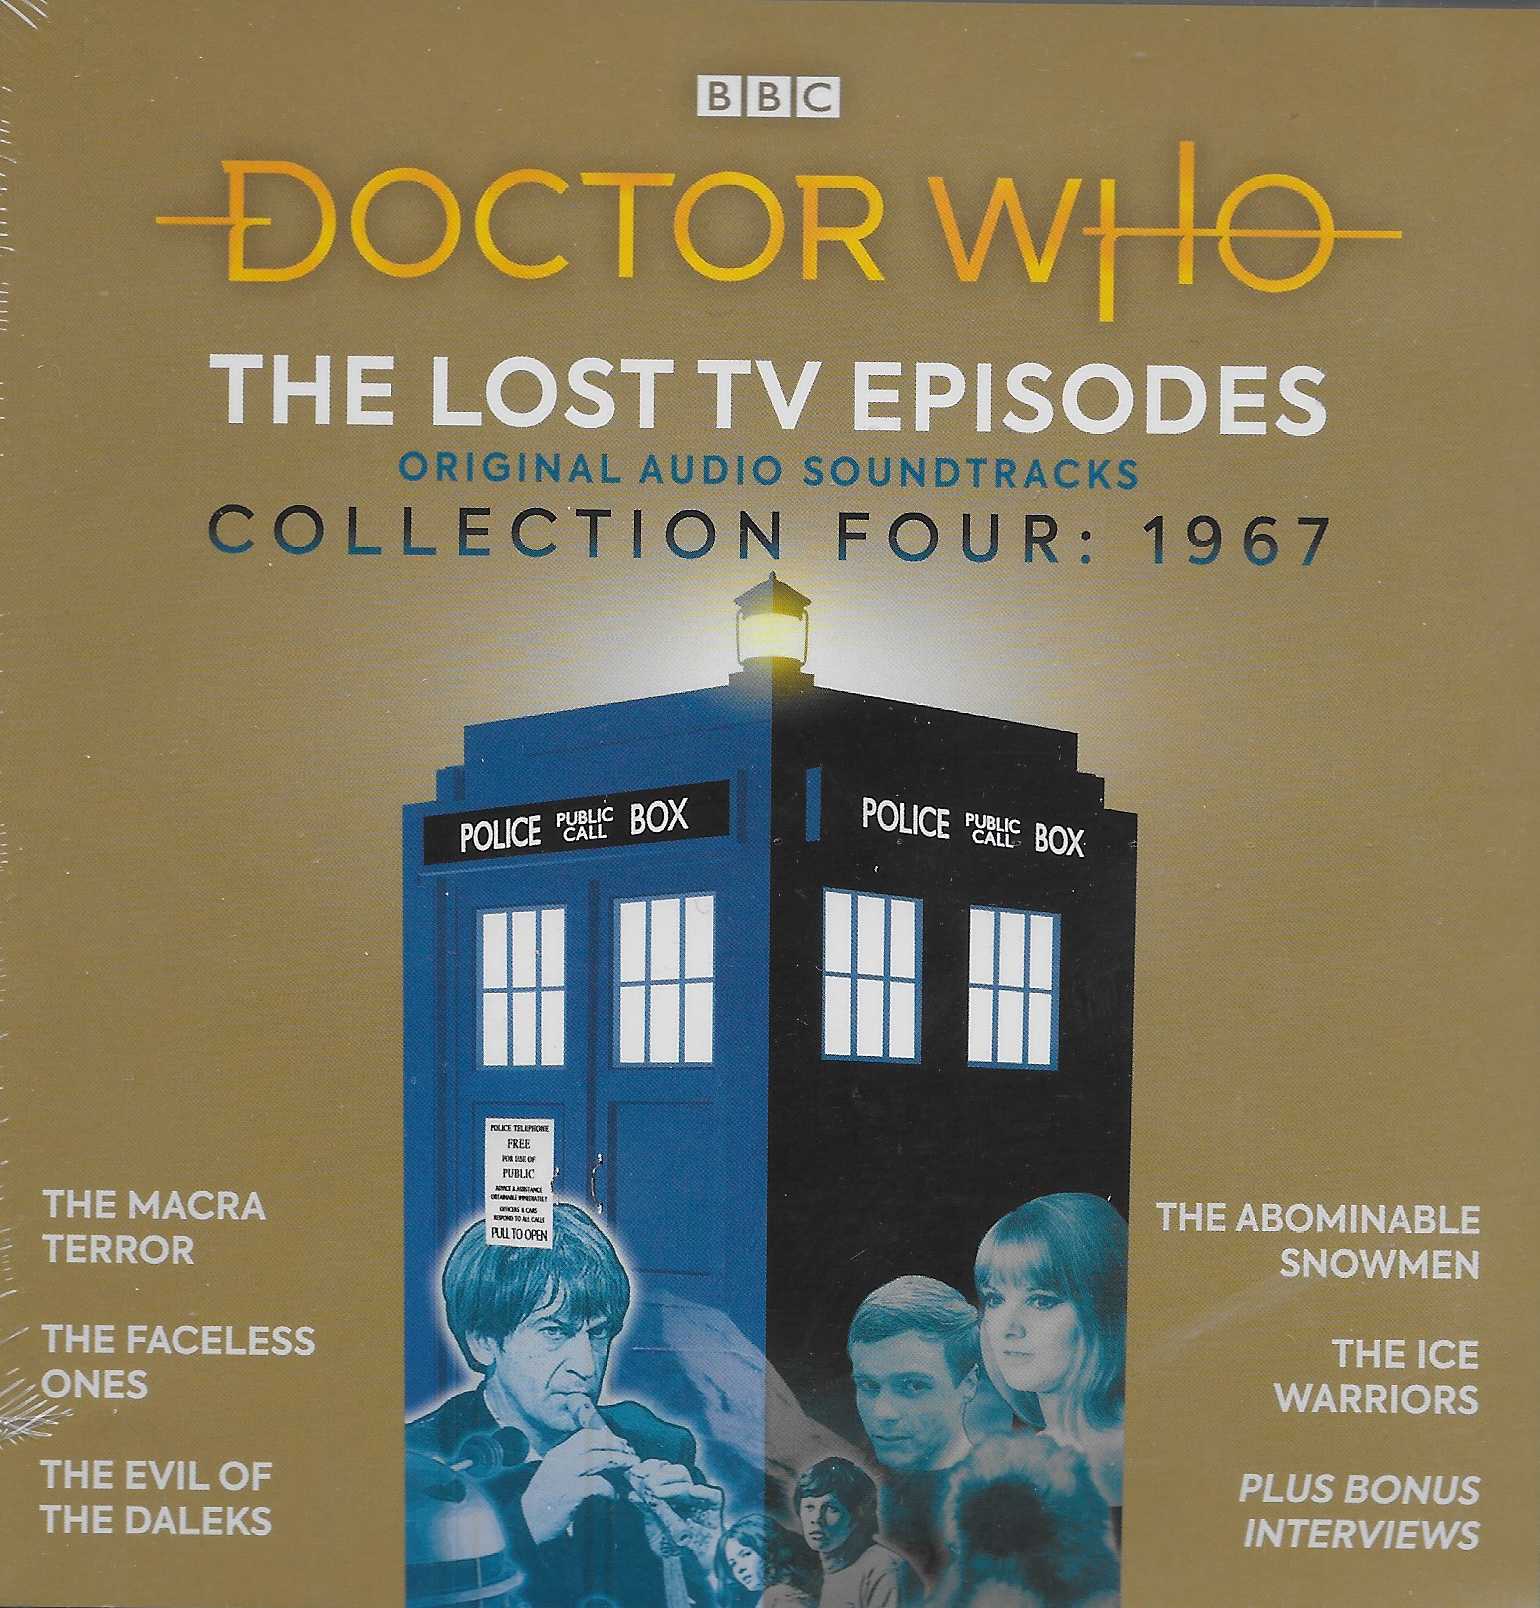 Picture of ISBN 978-1-52912-950-2 Doctor Who - The lost TV episodes - Collection four: 1967 by artist Various from the BBC cds - Records and Tapes library